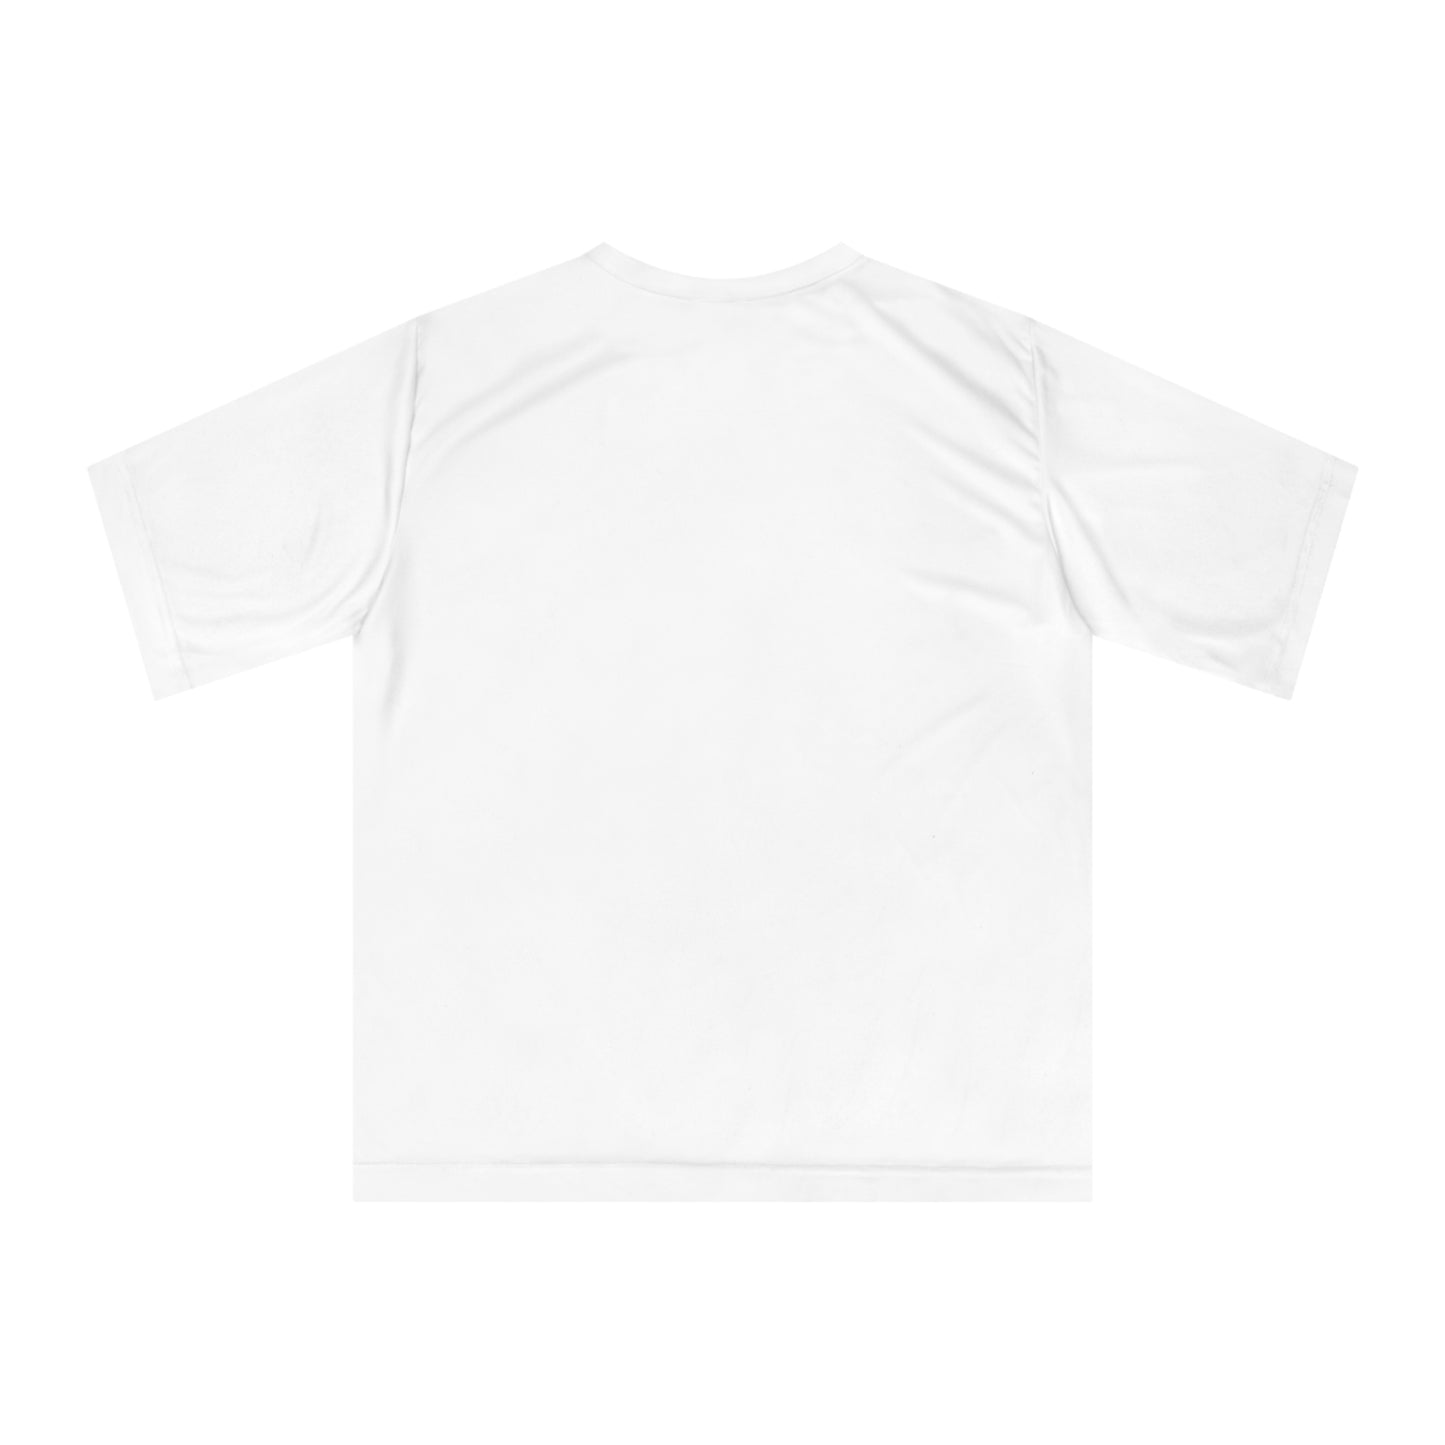 Unisex Performance For the Streets Shirt